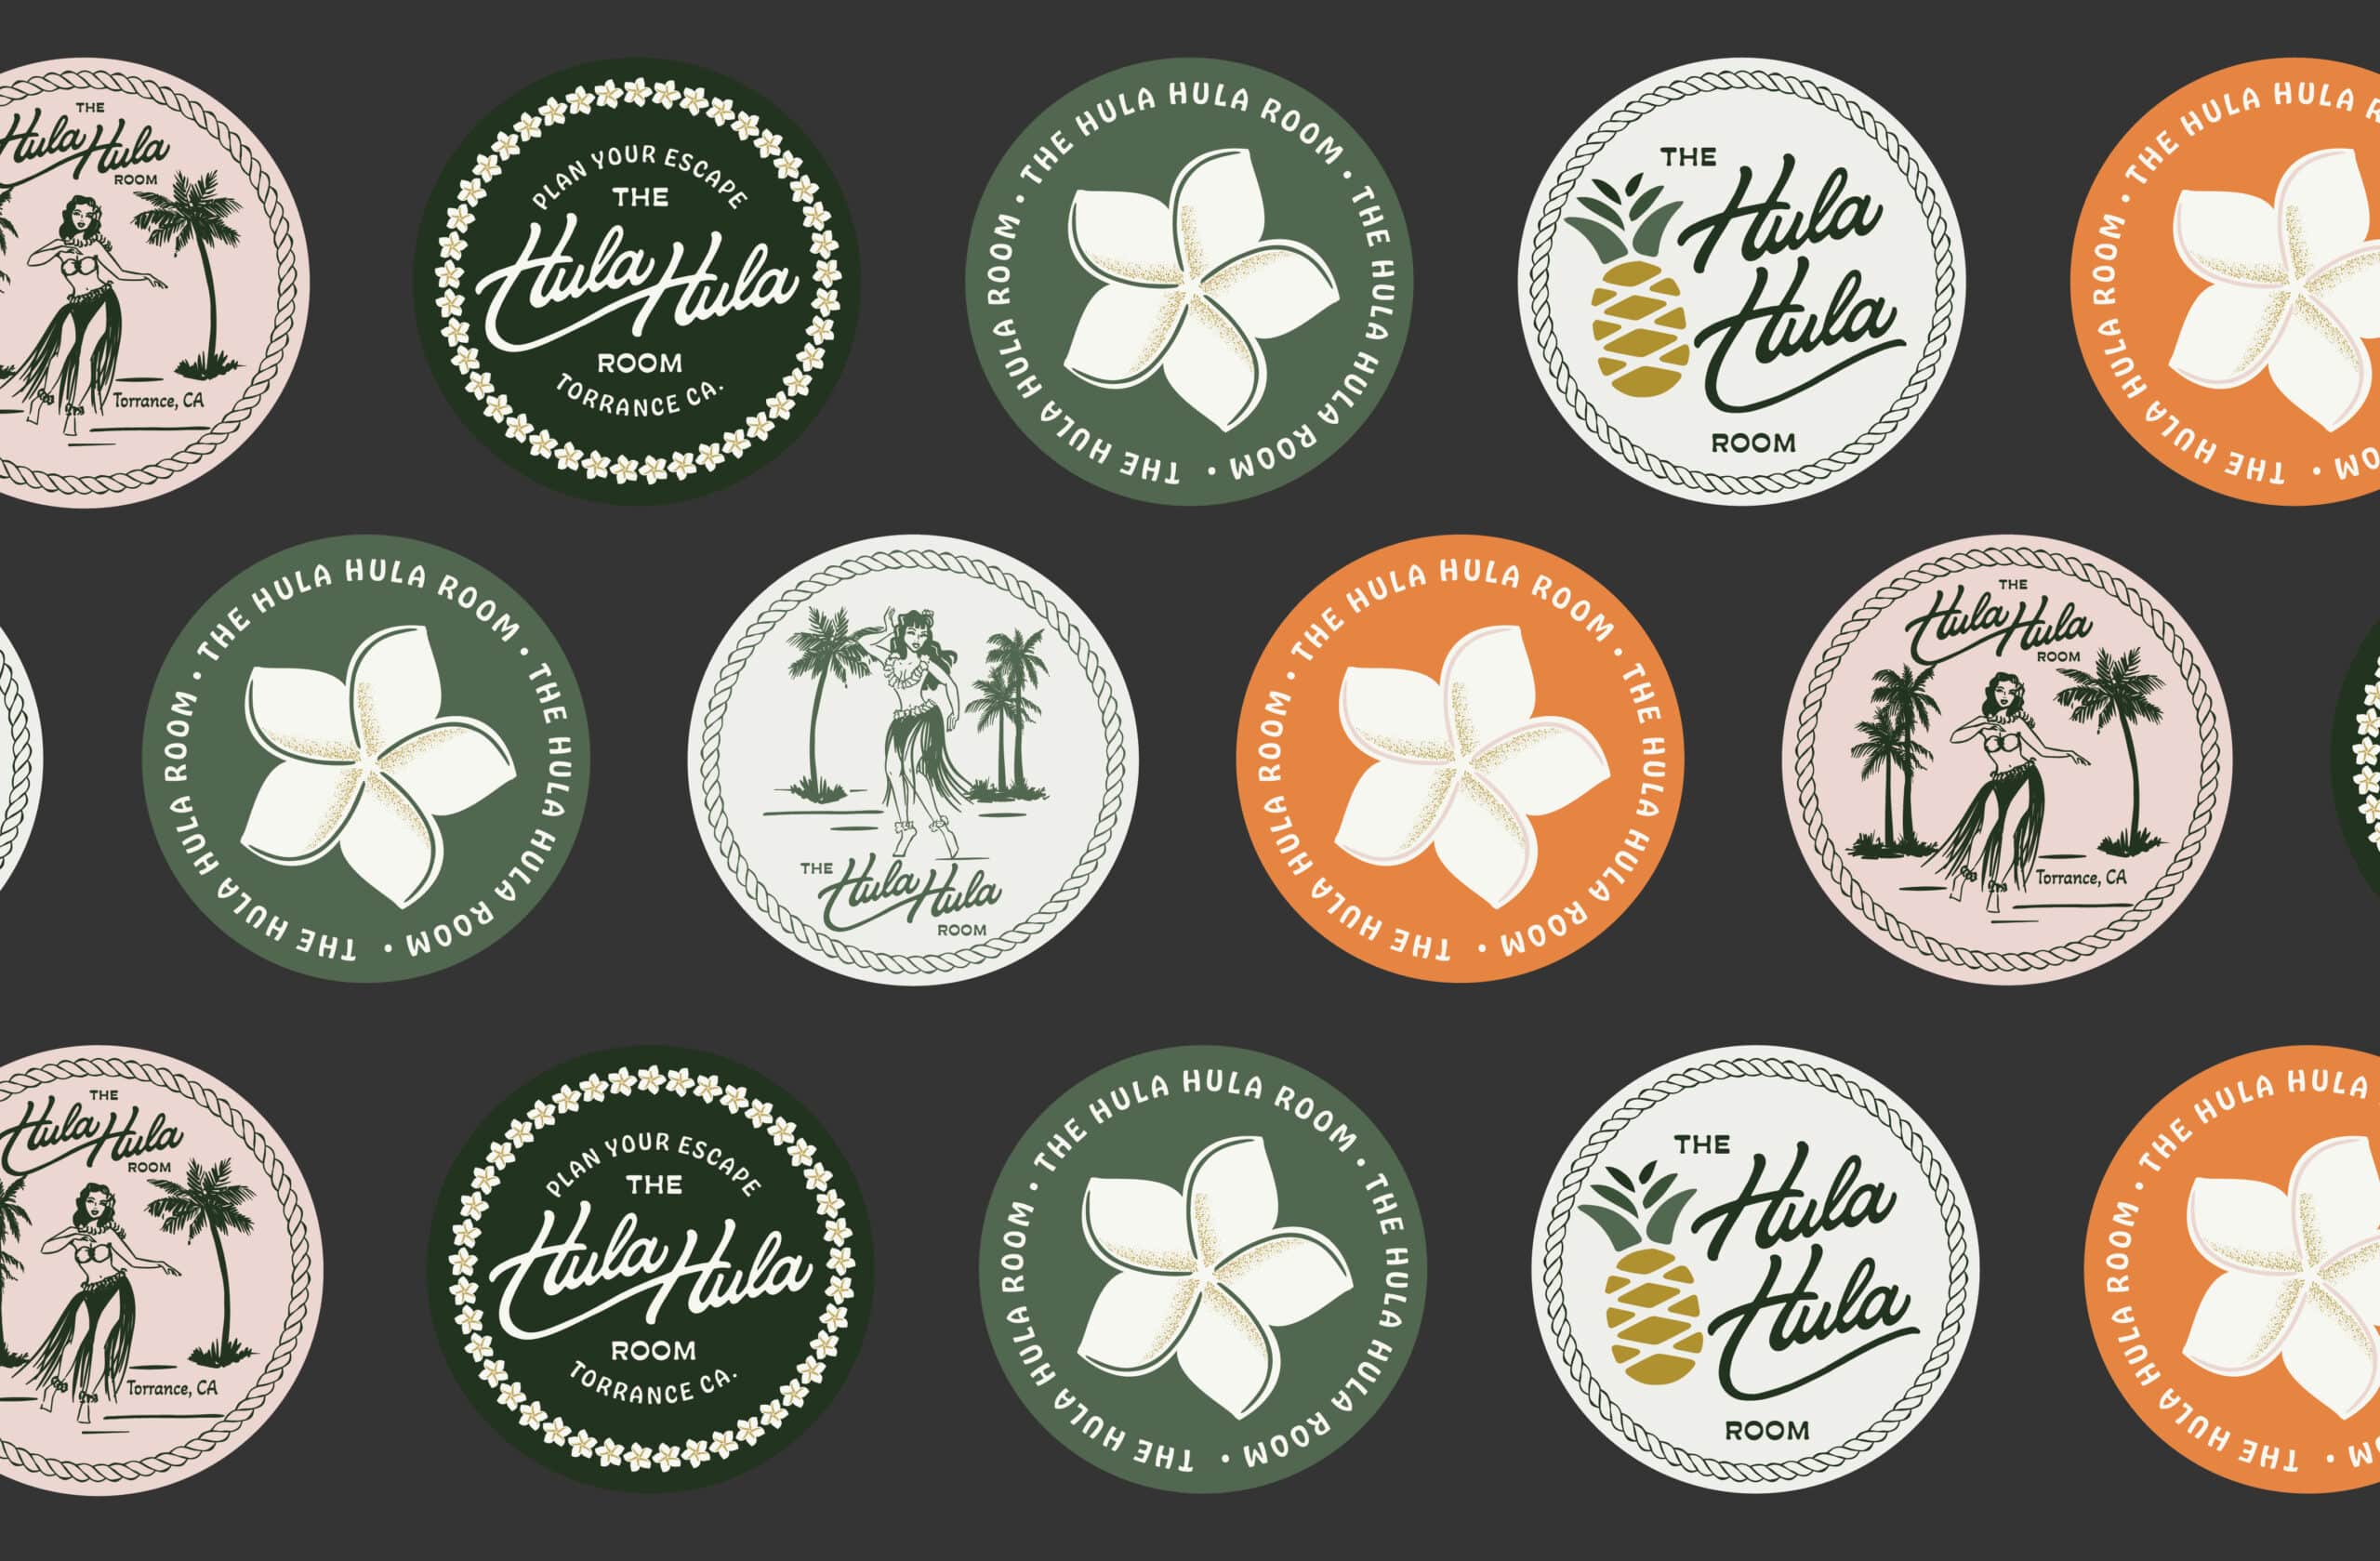 Coasters for The Hula Hula Room Tiki Bar in Torrance California designed by Stellen Design logo design and branding agency in Los Angeles California specializing in logo design for hospitality brands